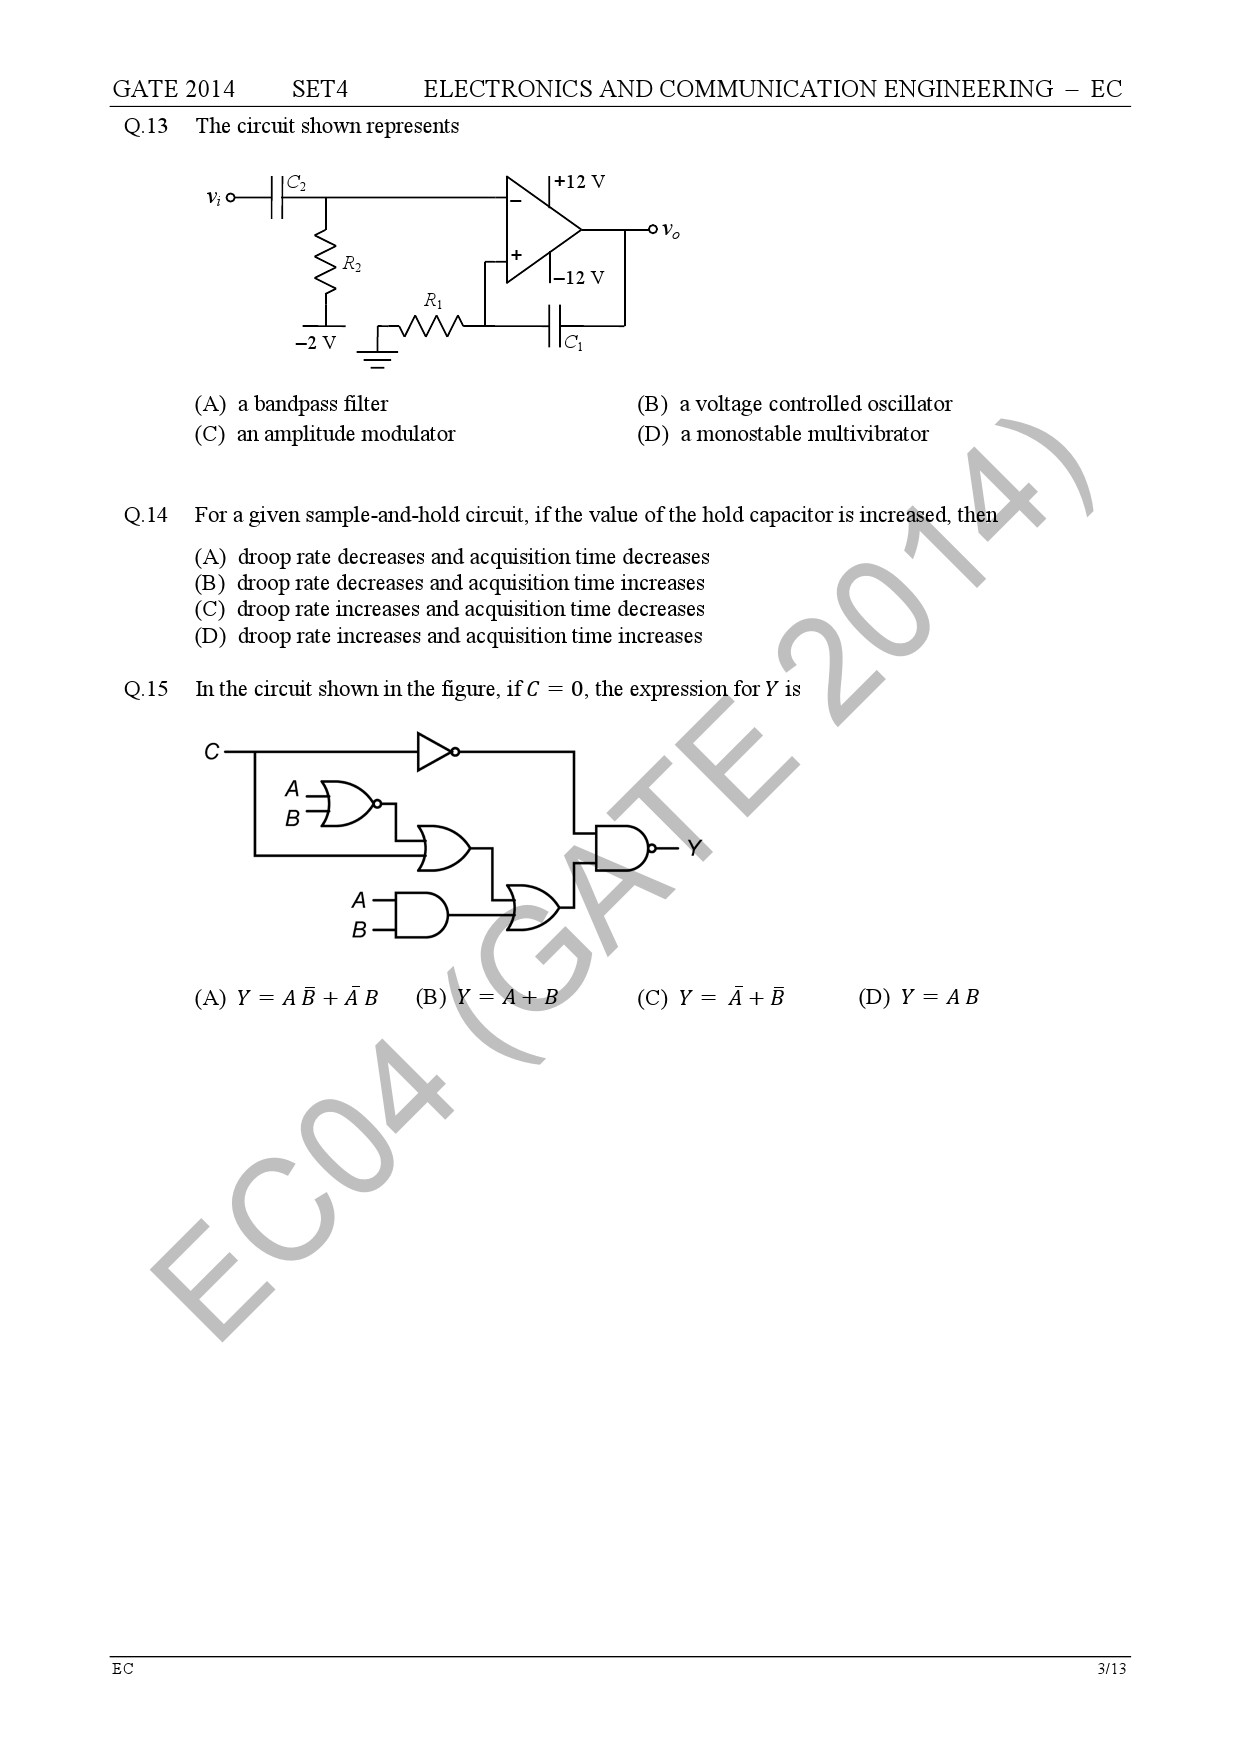 GATE Exam Question Paper 2014 Electronics and Communication Engineering Set 4 9